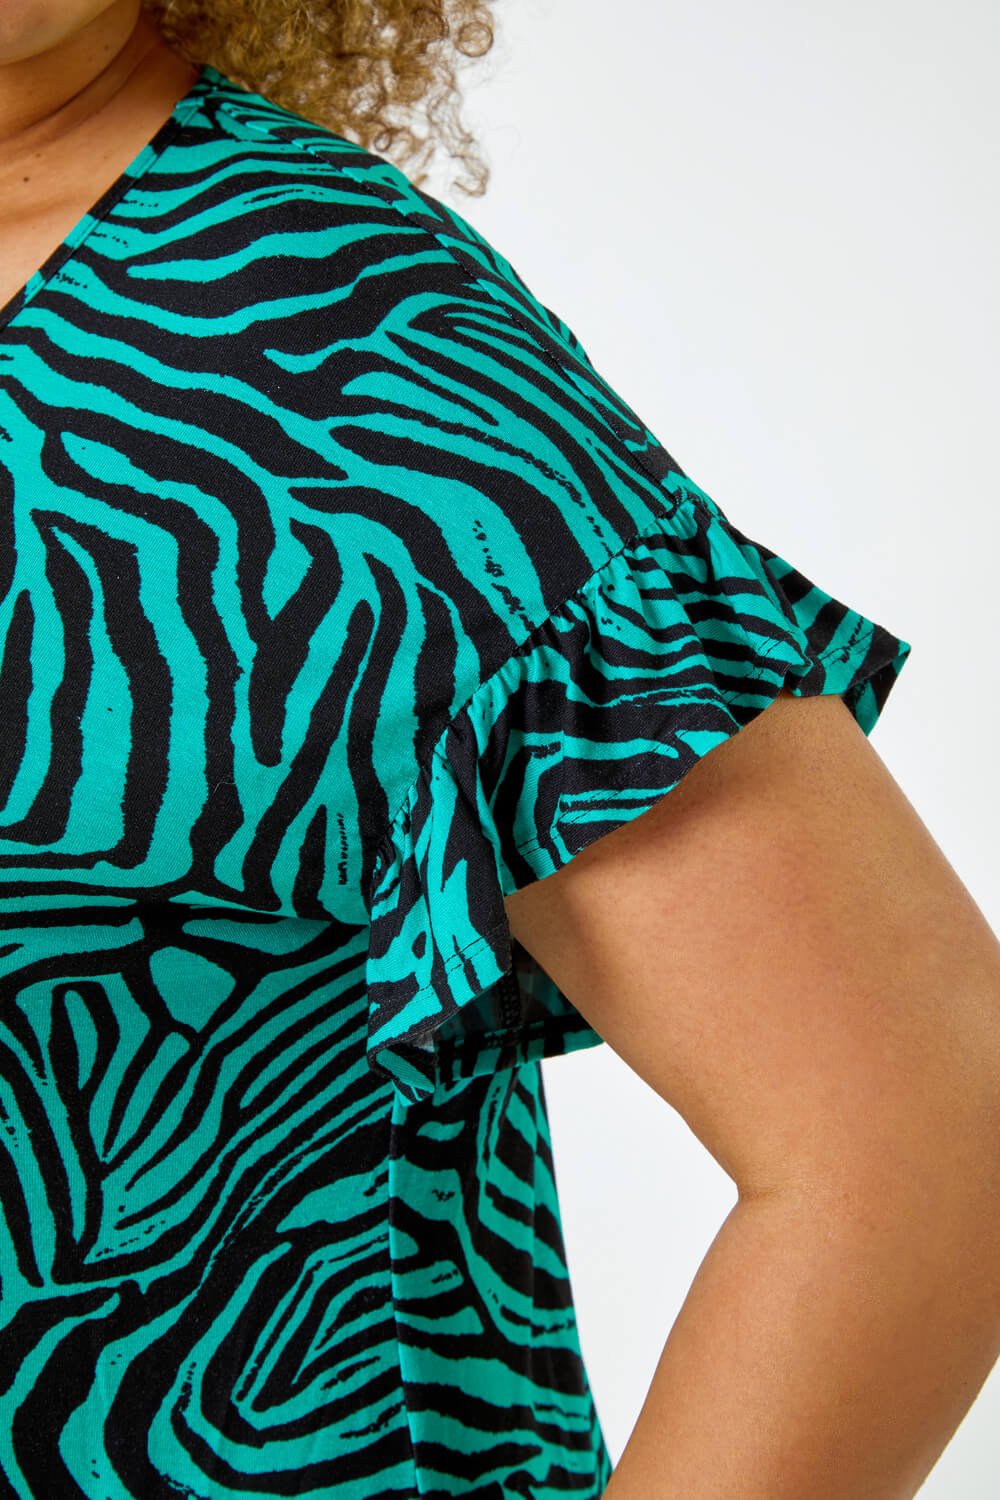 Green Curve Animal Print Stretch Jersey Top, Image 5 of 5